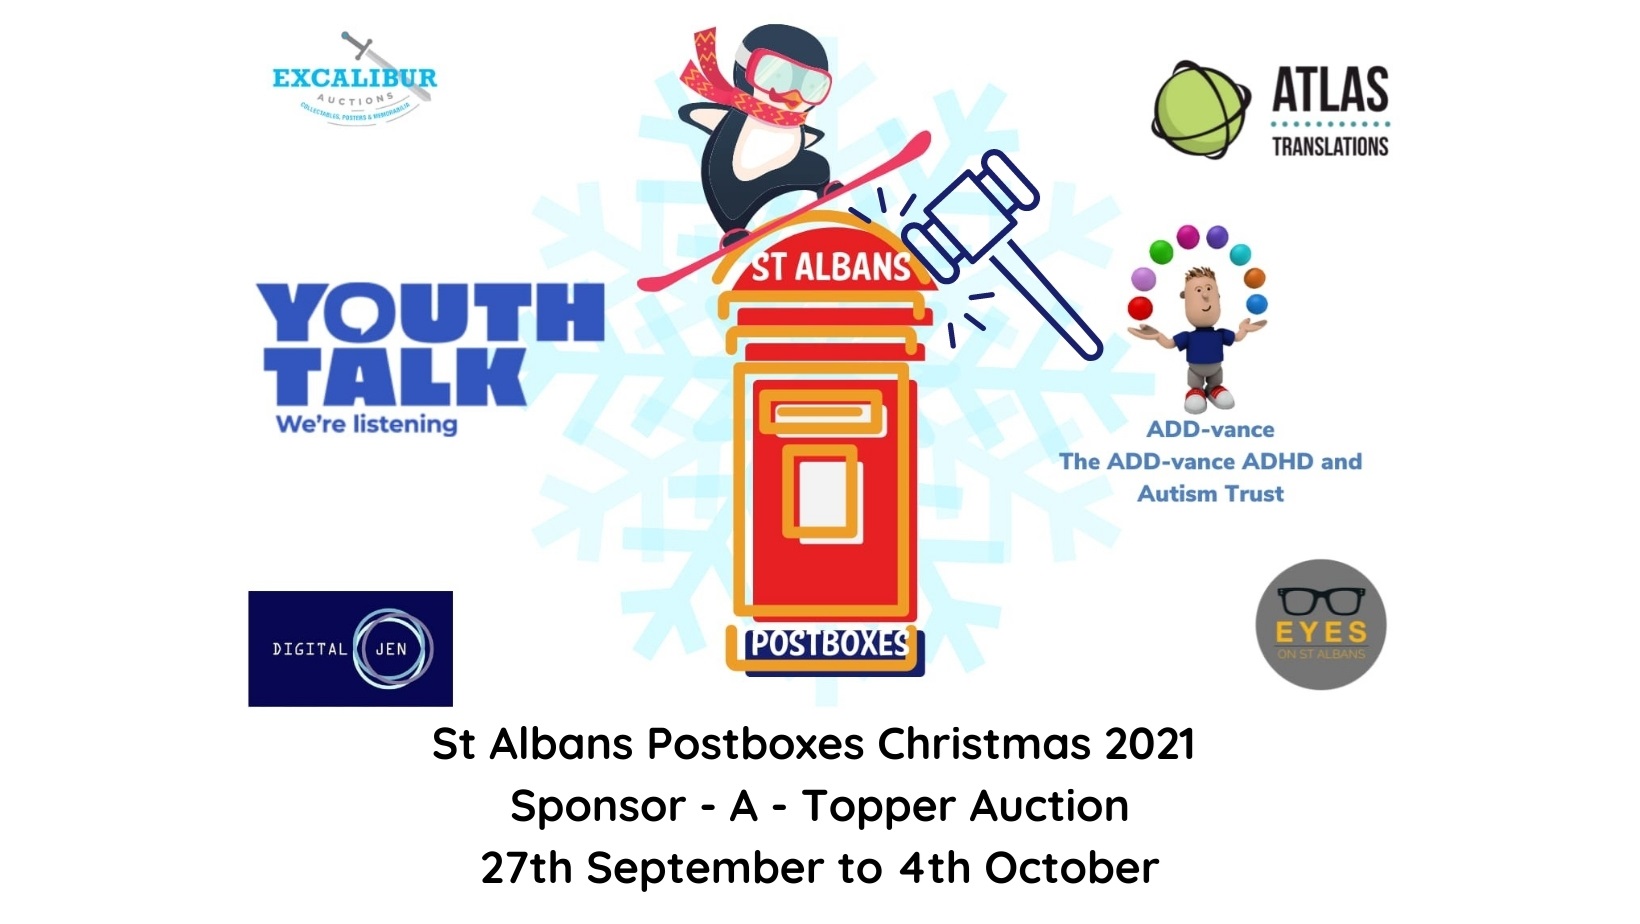 St Albans Postboxes December 2021